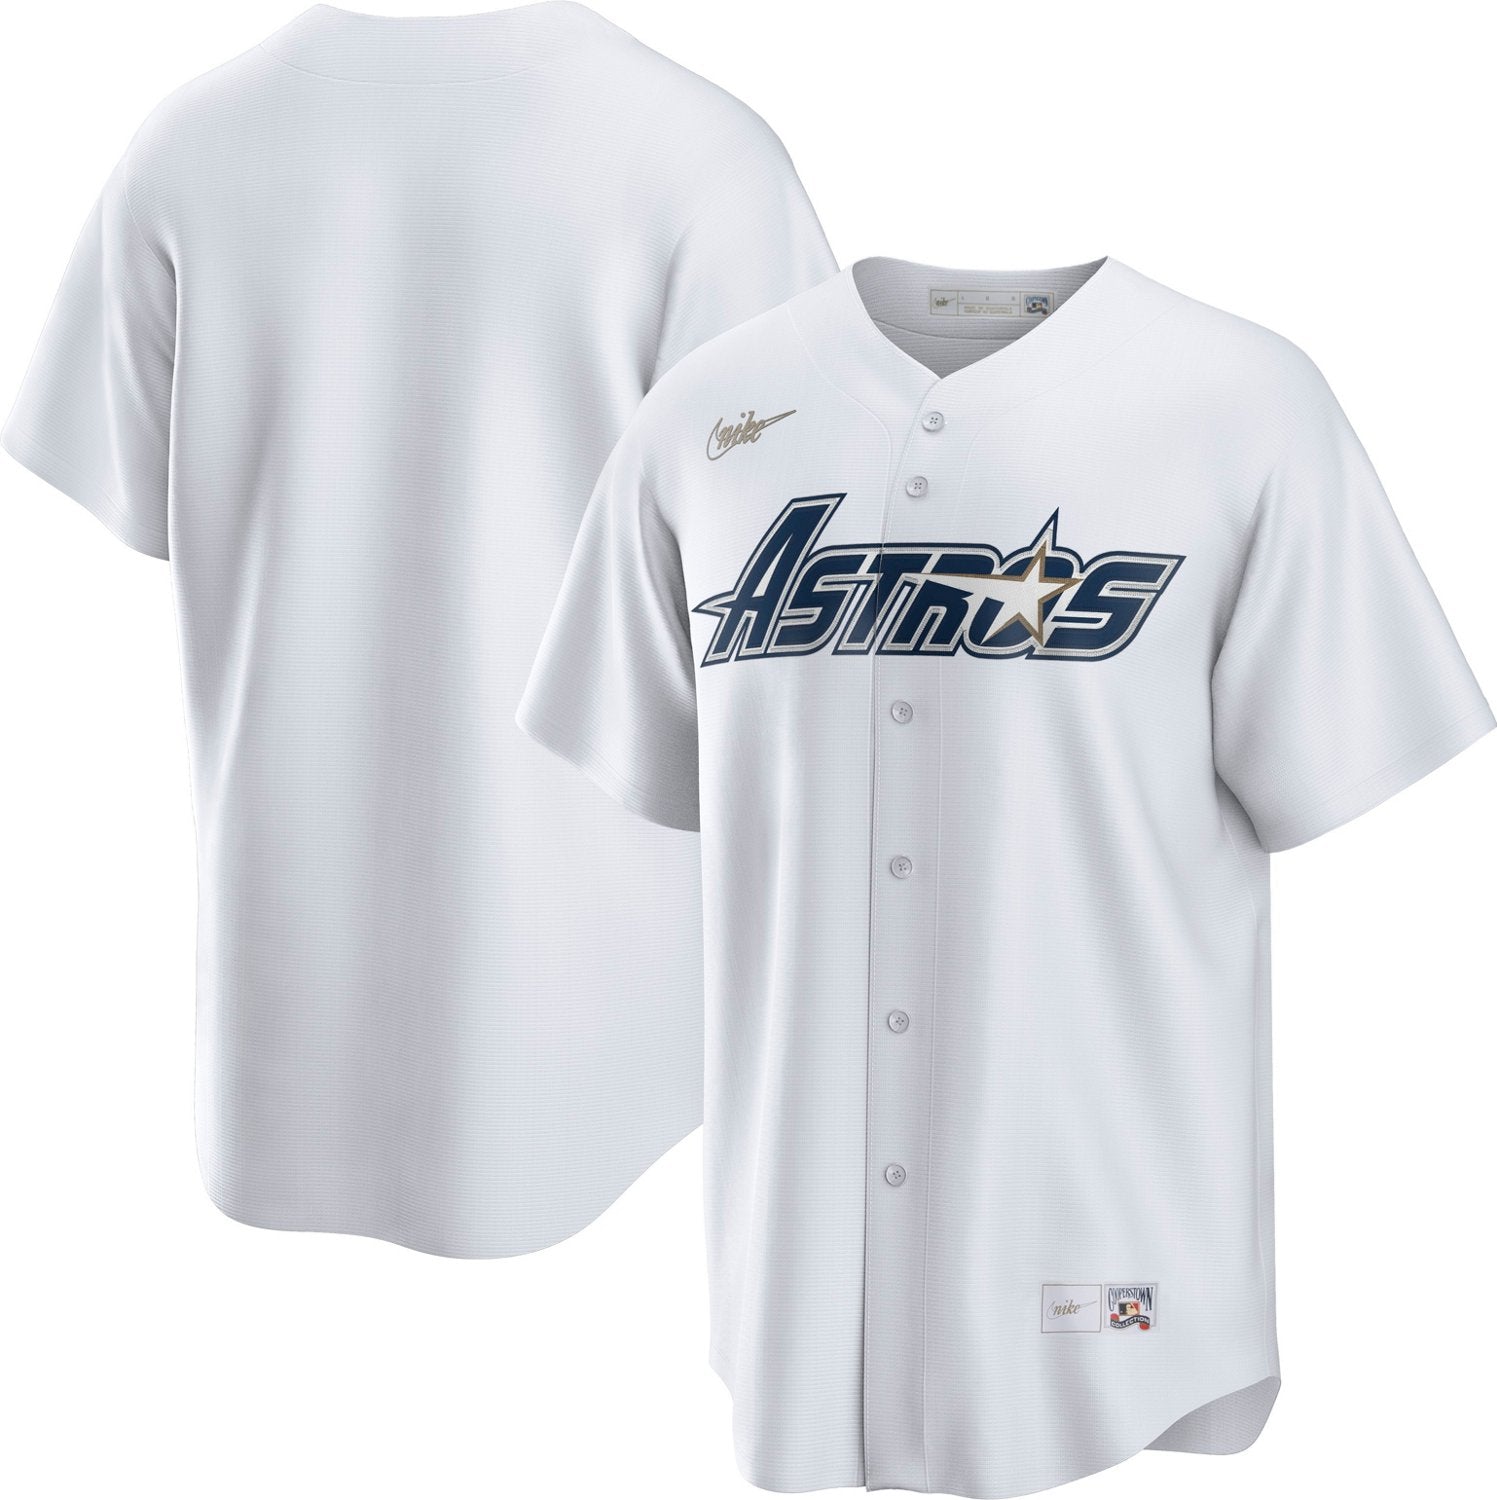 astros white and gold jersey